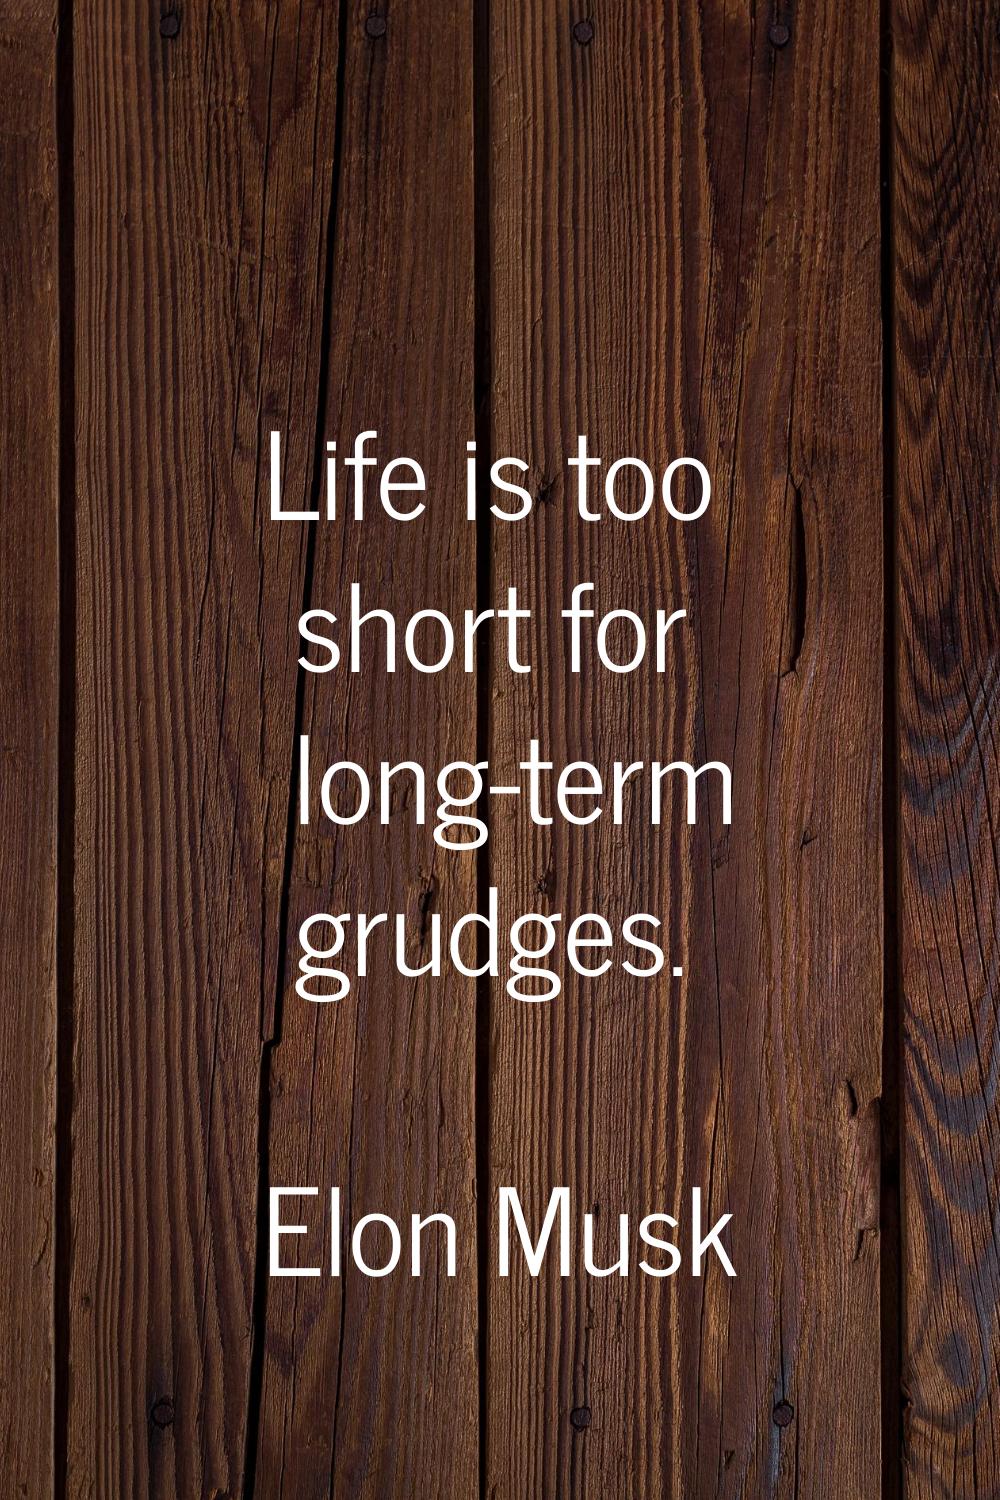 Life is too short for long-term grudges.